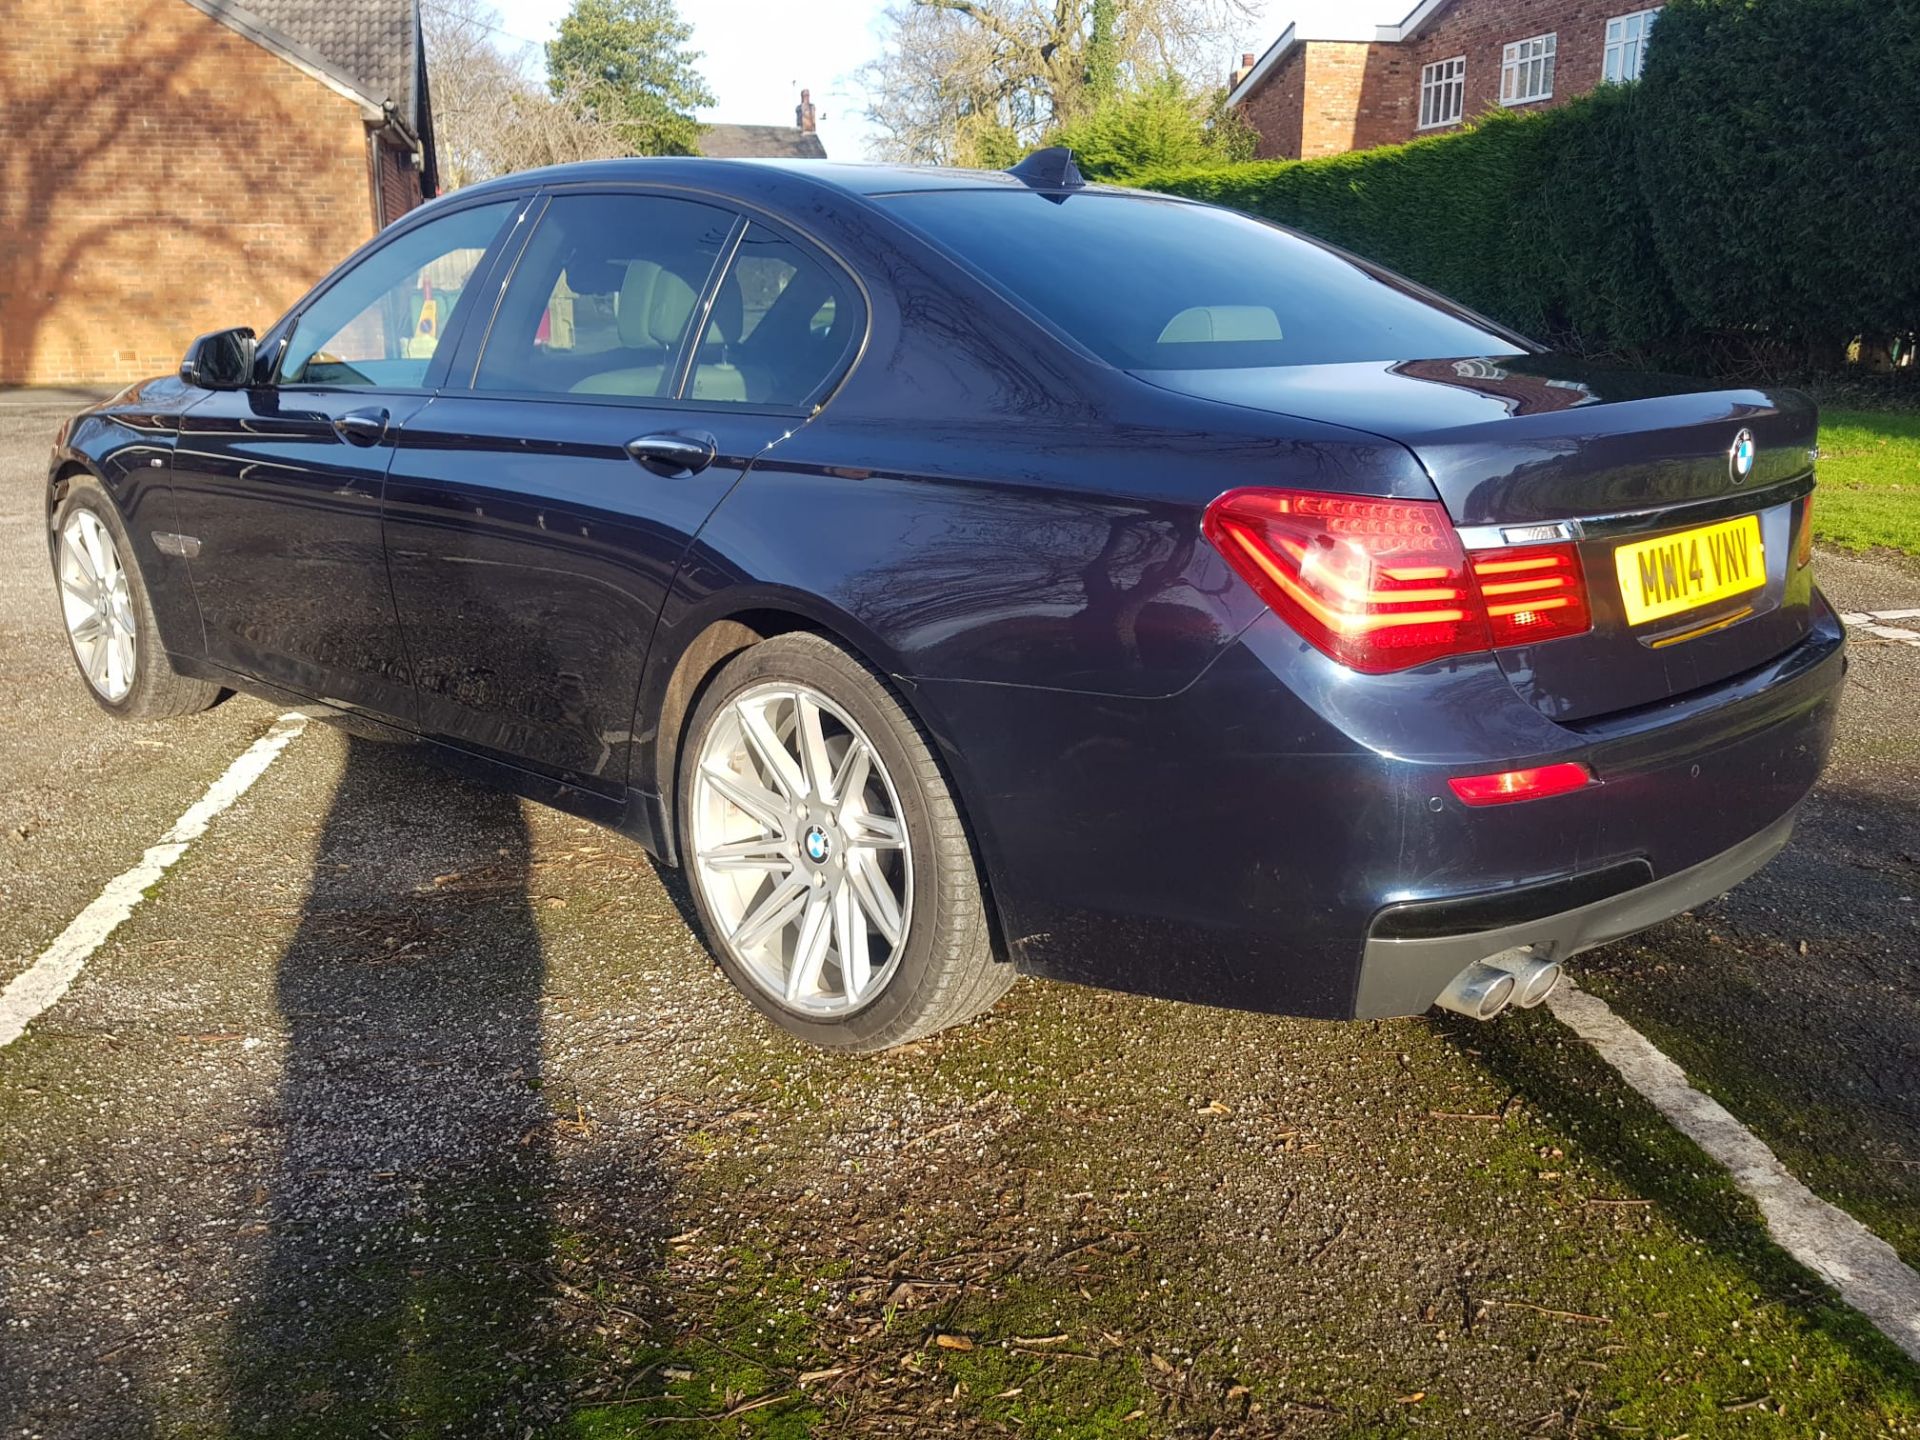 2014 730D M-SPORT SALOON - FULL SERVICE HISTORY - 115K MILES - Image 30 of 43